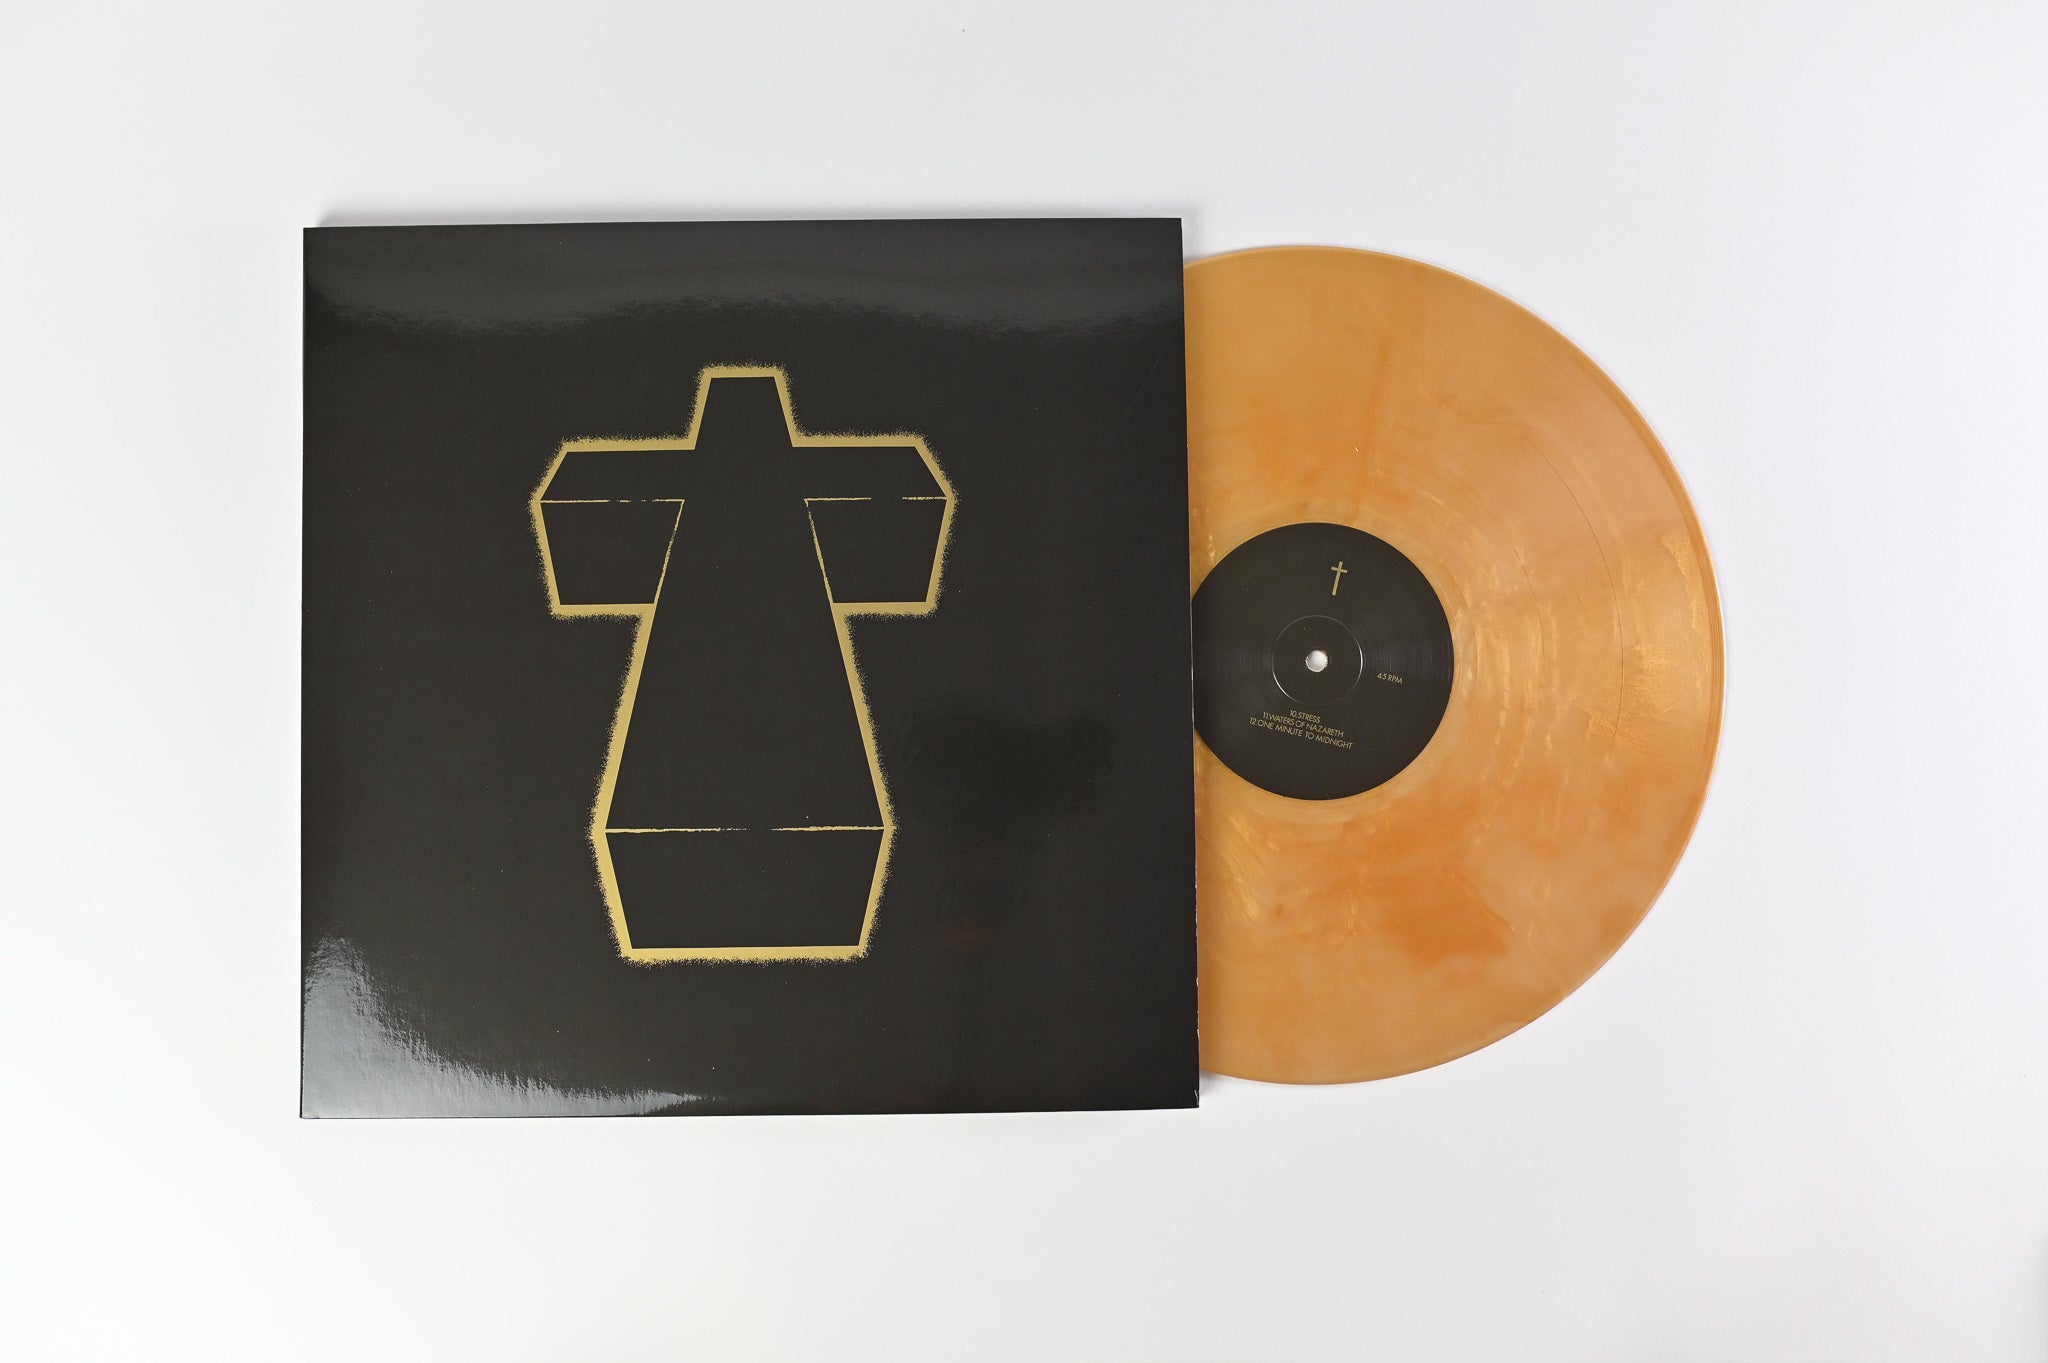 Justice - † on Ed Banger/Because Music Vinyl Me, Please Reissue Gold Nugget Vinyl